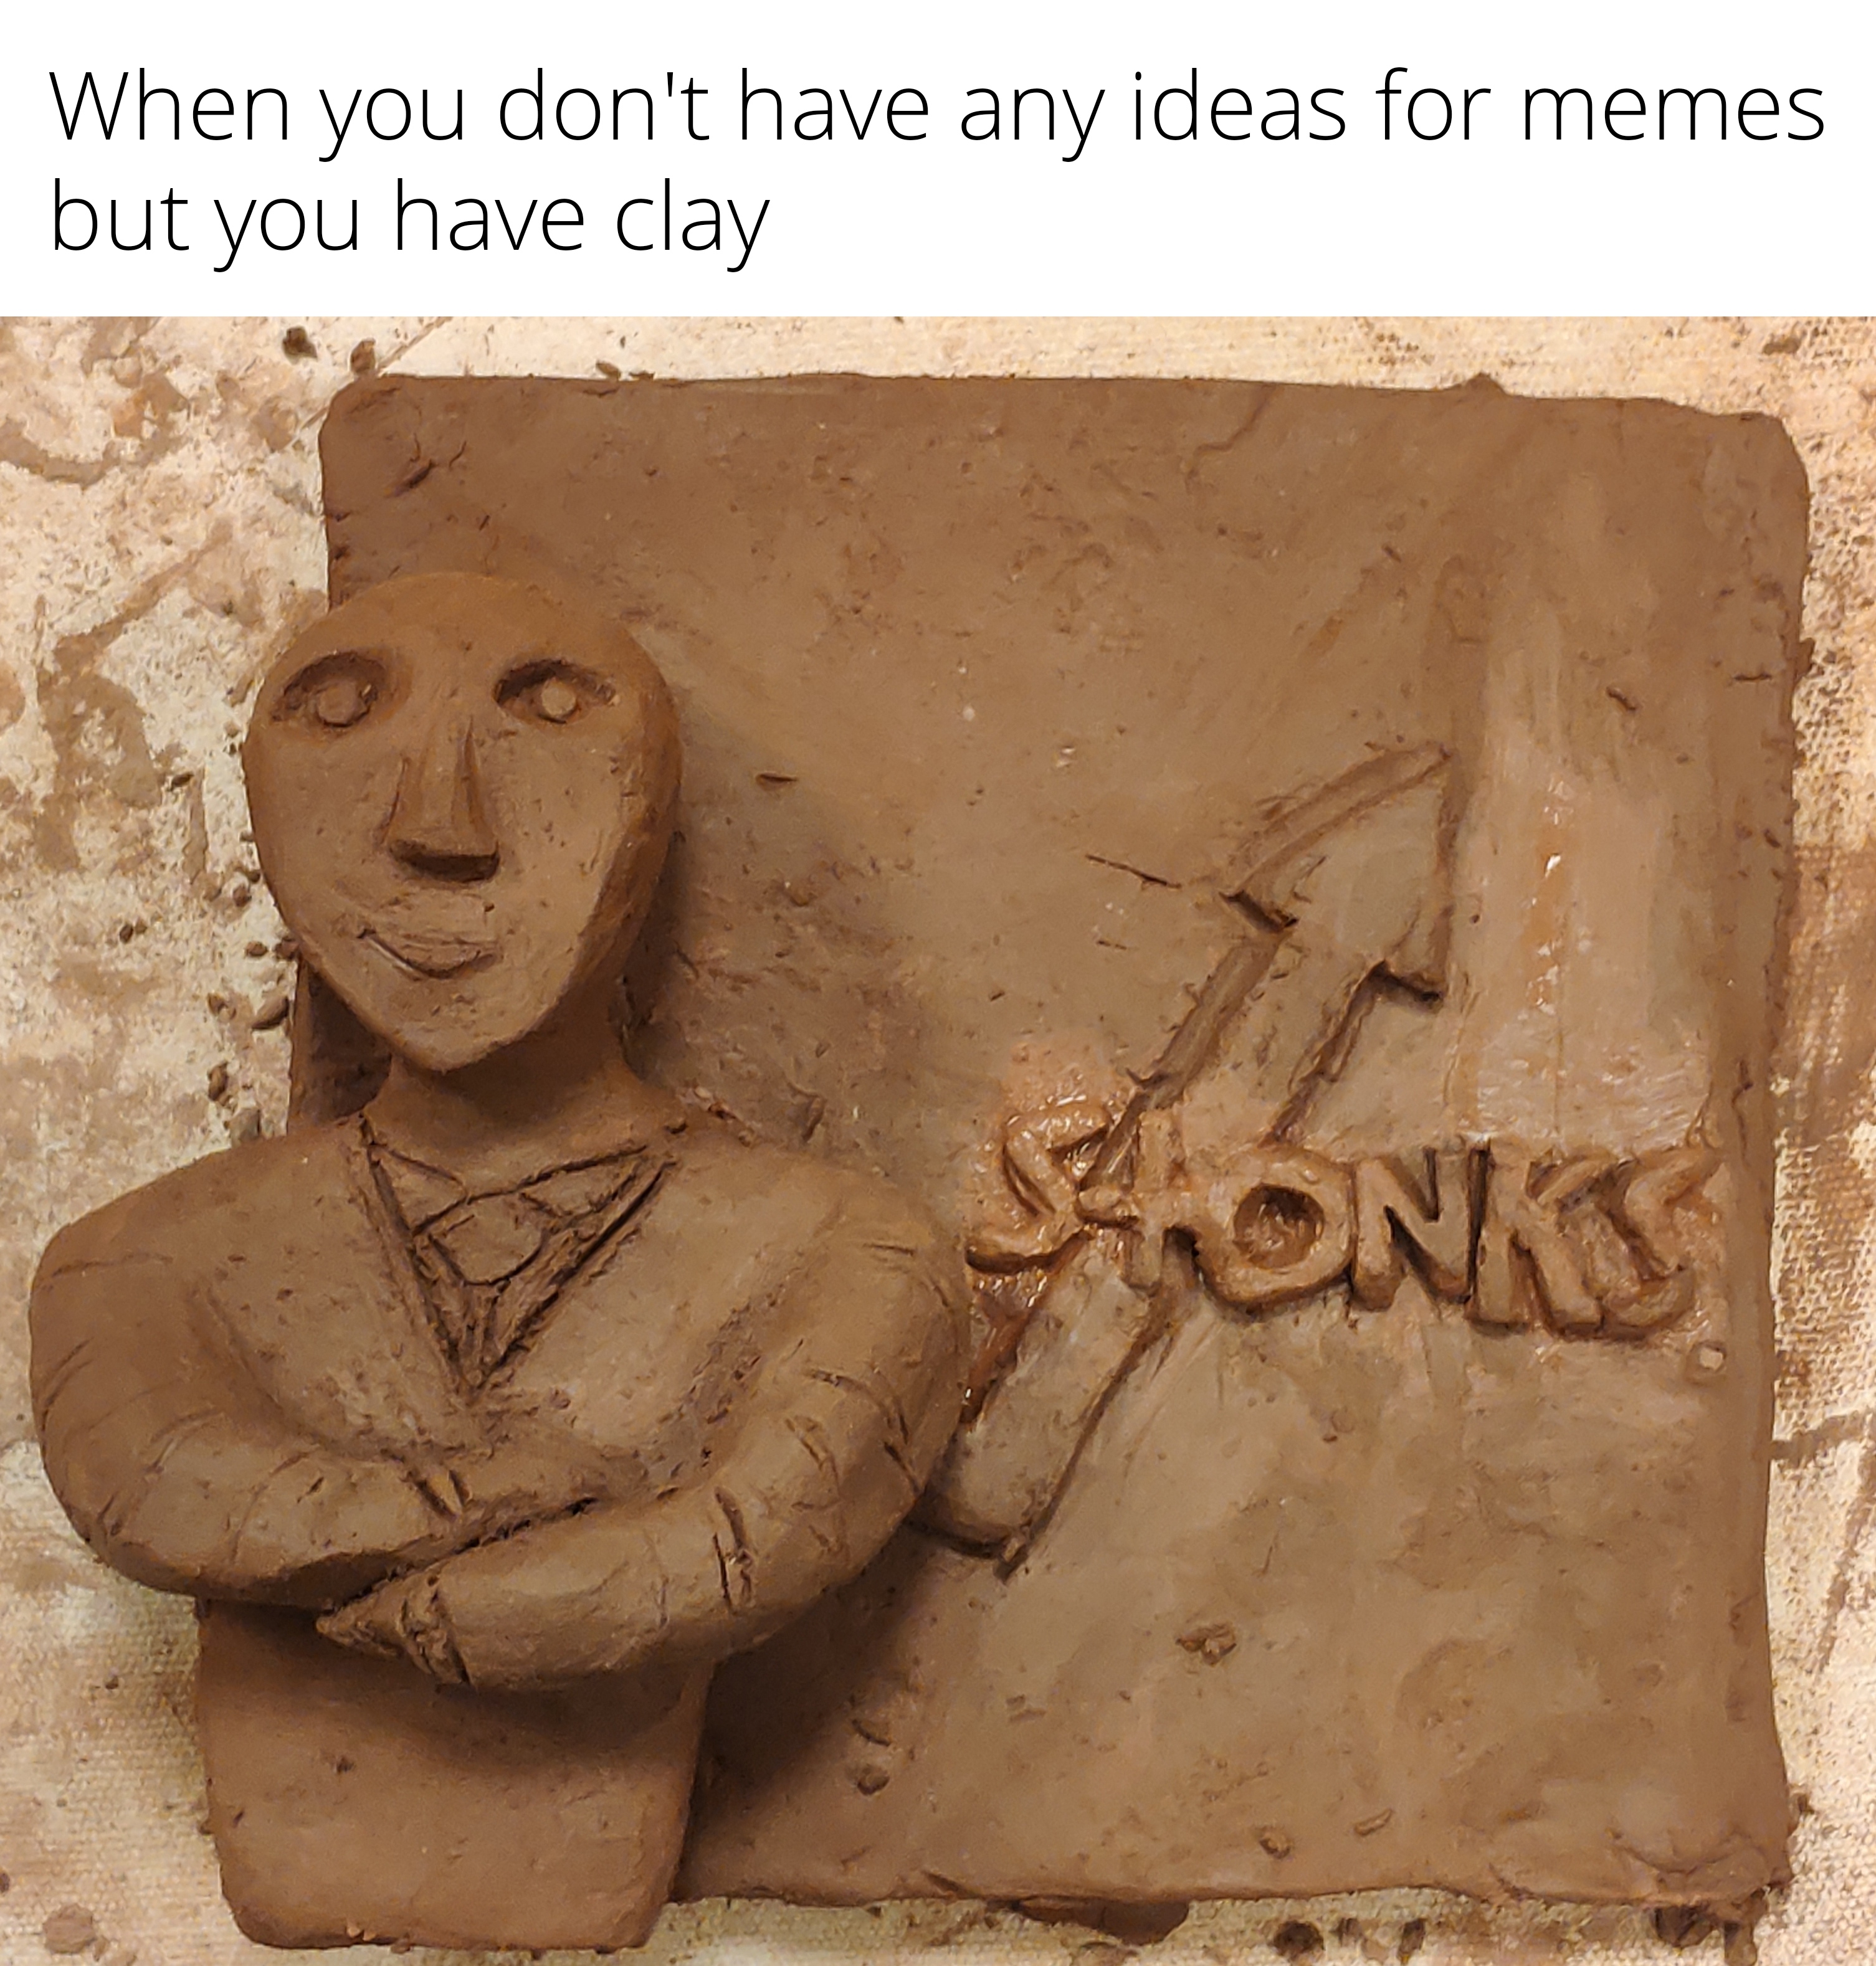 sculpture - When you don't have any ideas for memes but you have clay Sonks